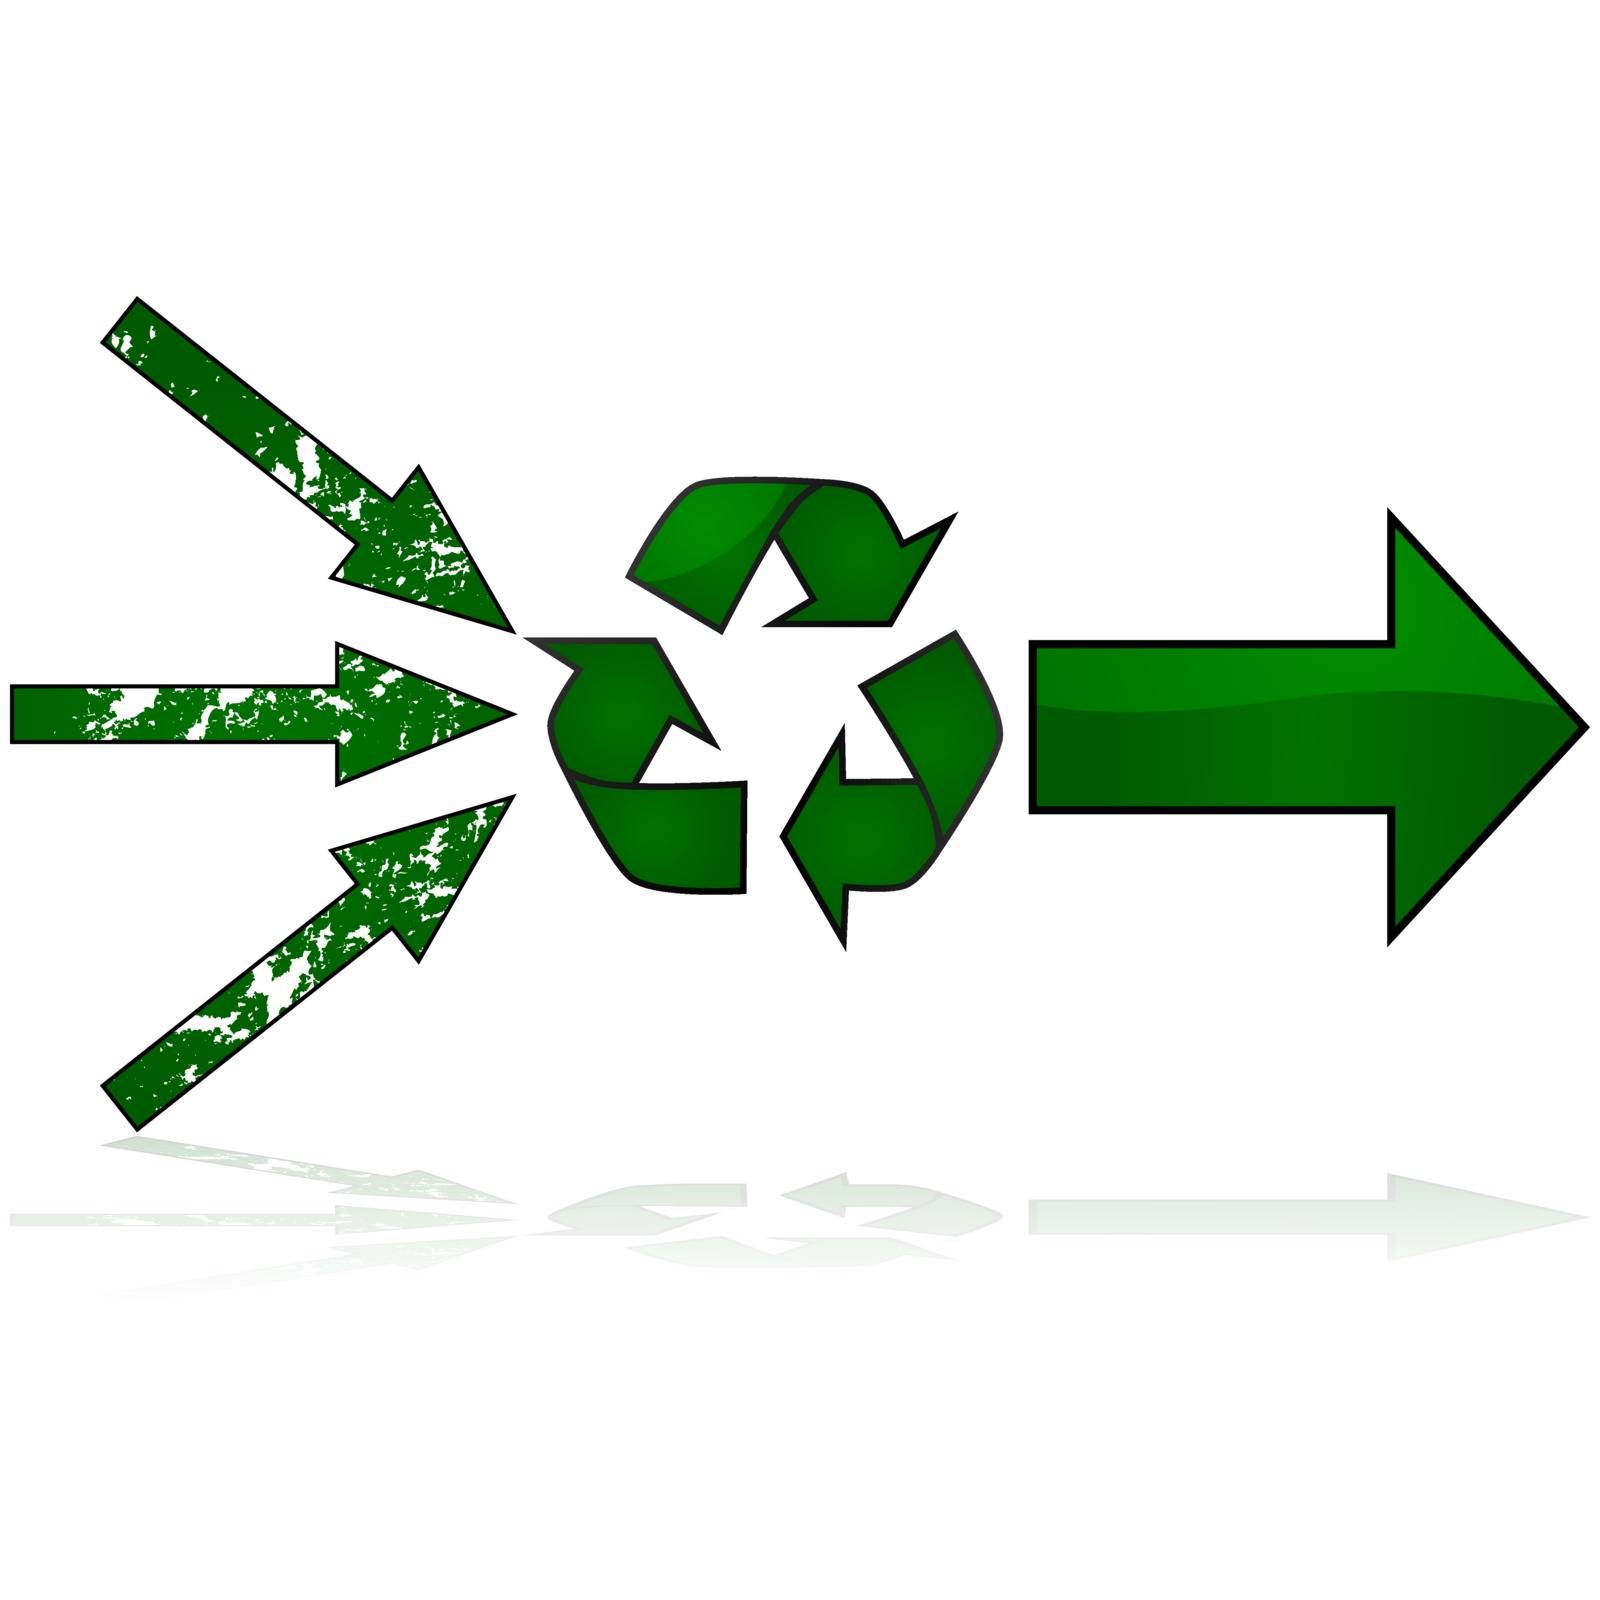 Concept illustration showing three damaged arrows pointing towards the recycling symbol and coming out as a strong new arrow